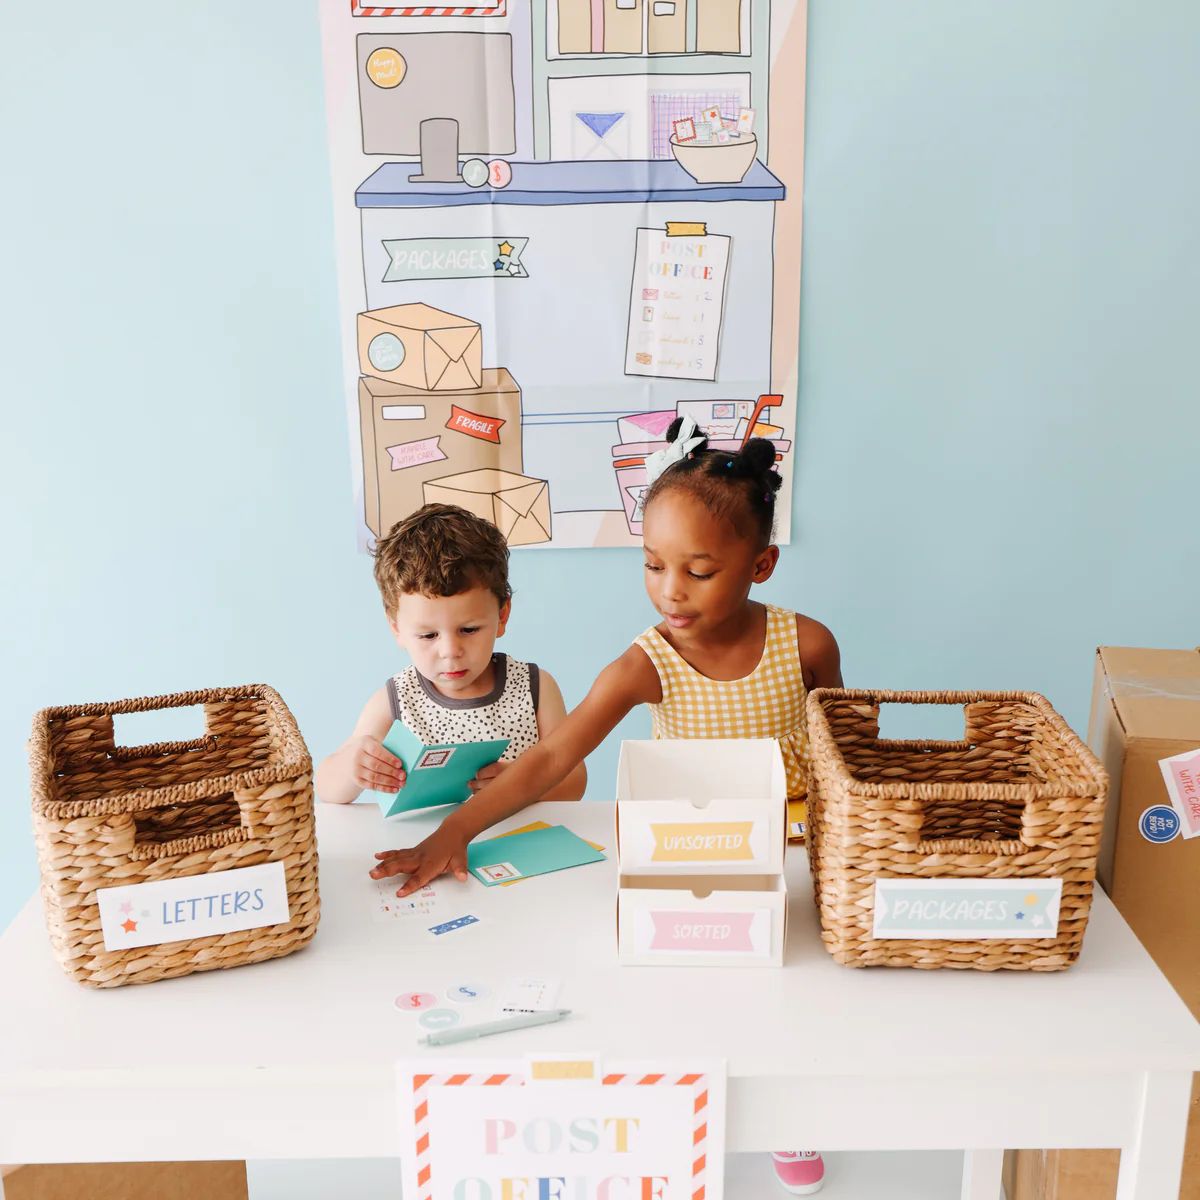 Post Office Inspired Play Kit | Magic Playbook